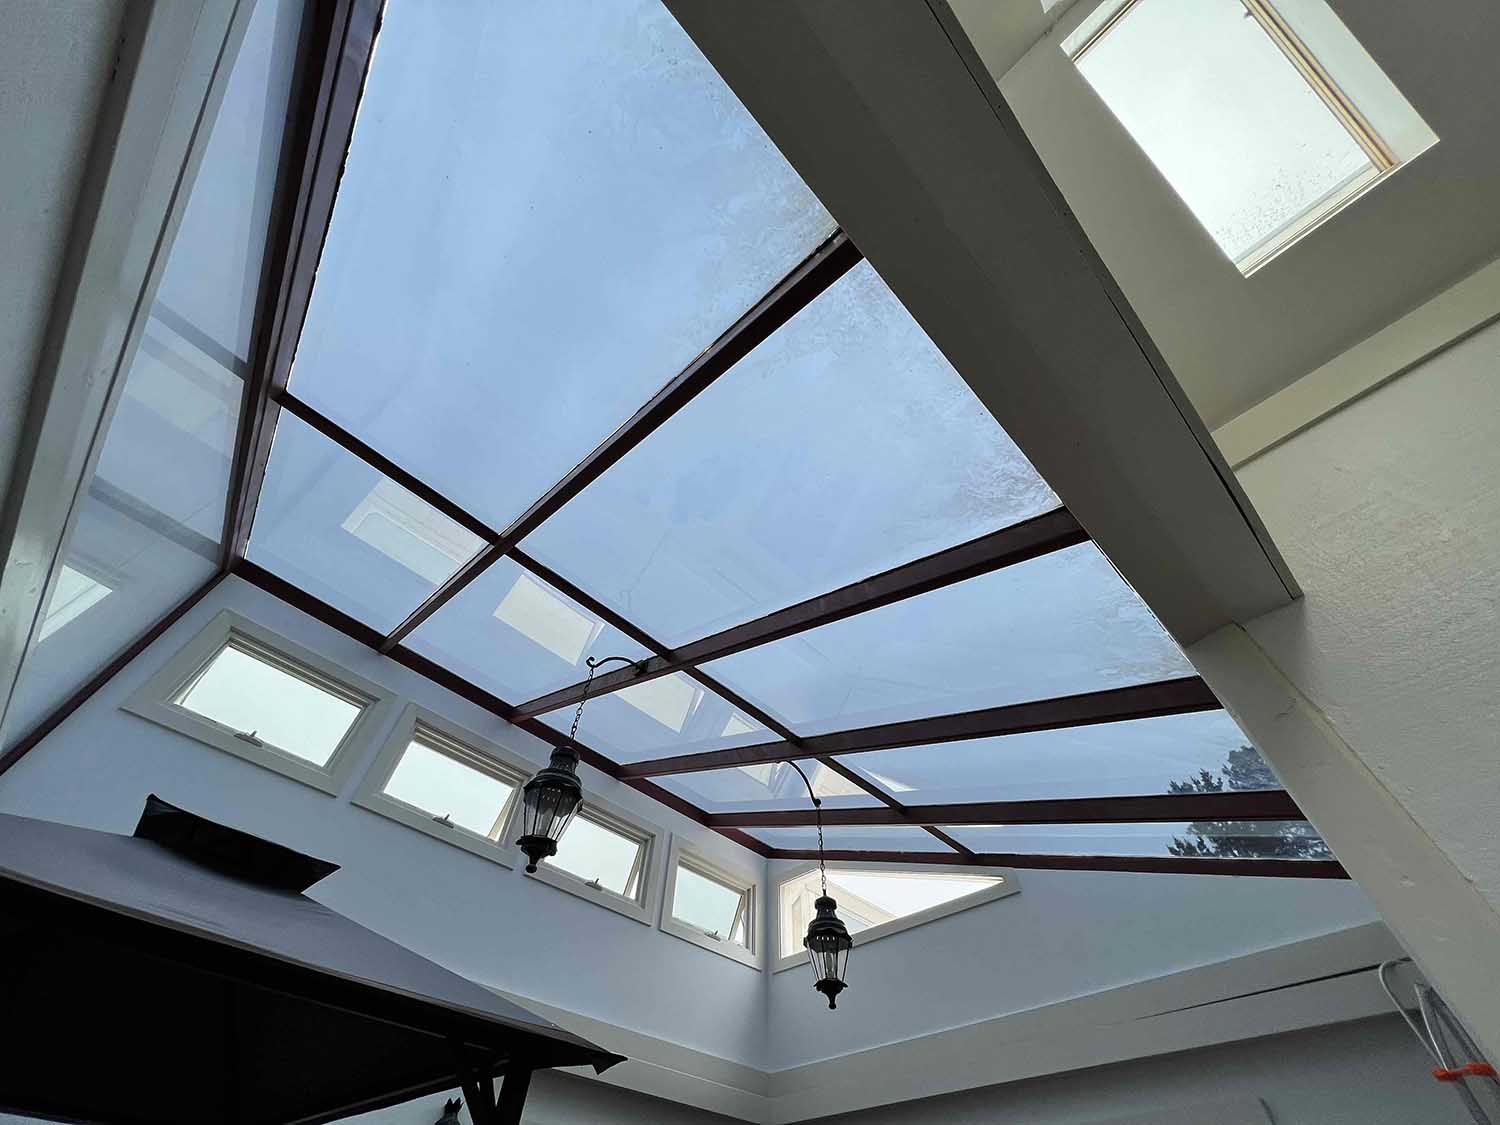 If you have skylights, you need window film. It offers so many benefits for homeowners. Installed by ClimatePro.